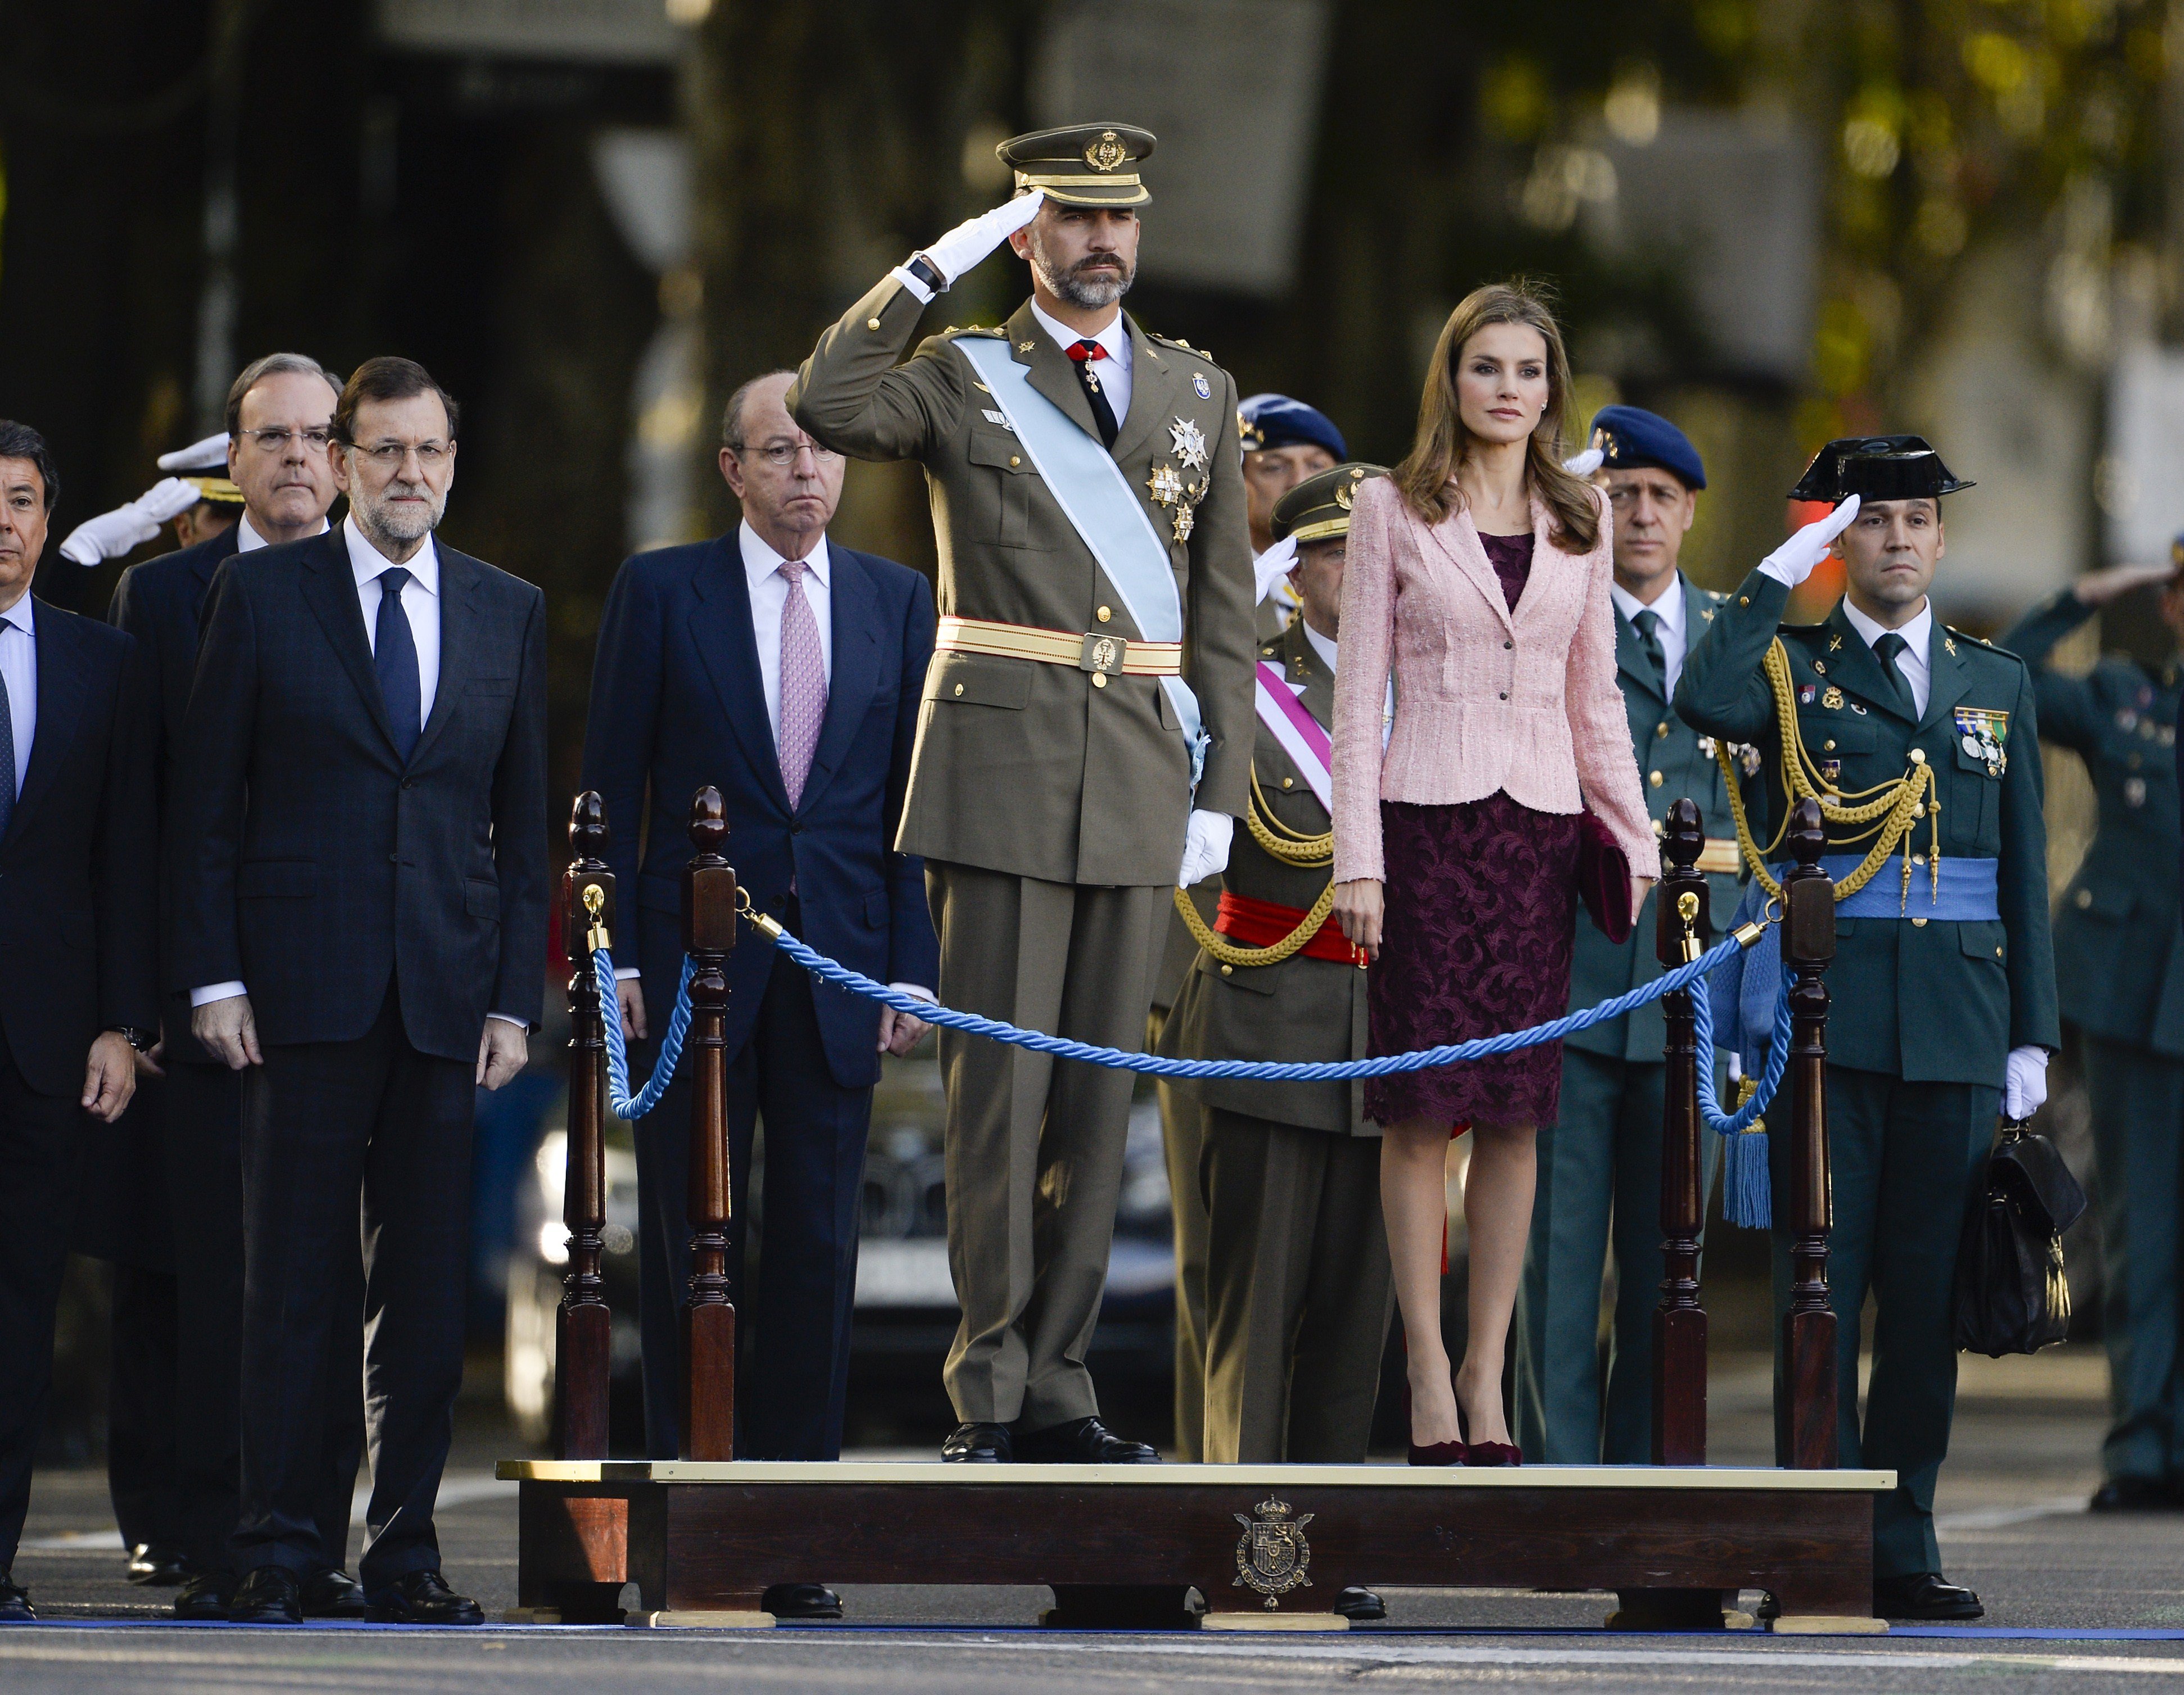 Spain's Crown Prince Felipe and his wife Letizia at the Spanish National Day military parade in Madrid on October 12, 2013. | Source: Getty Images